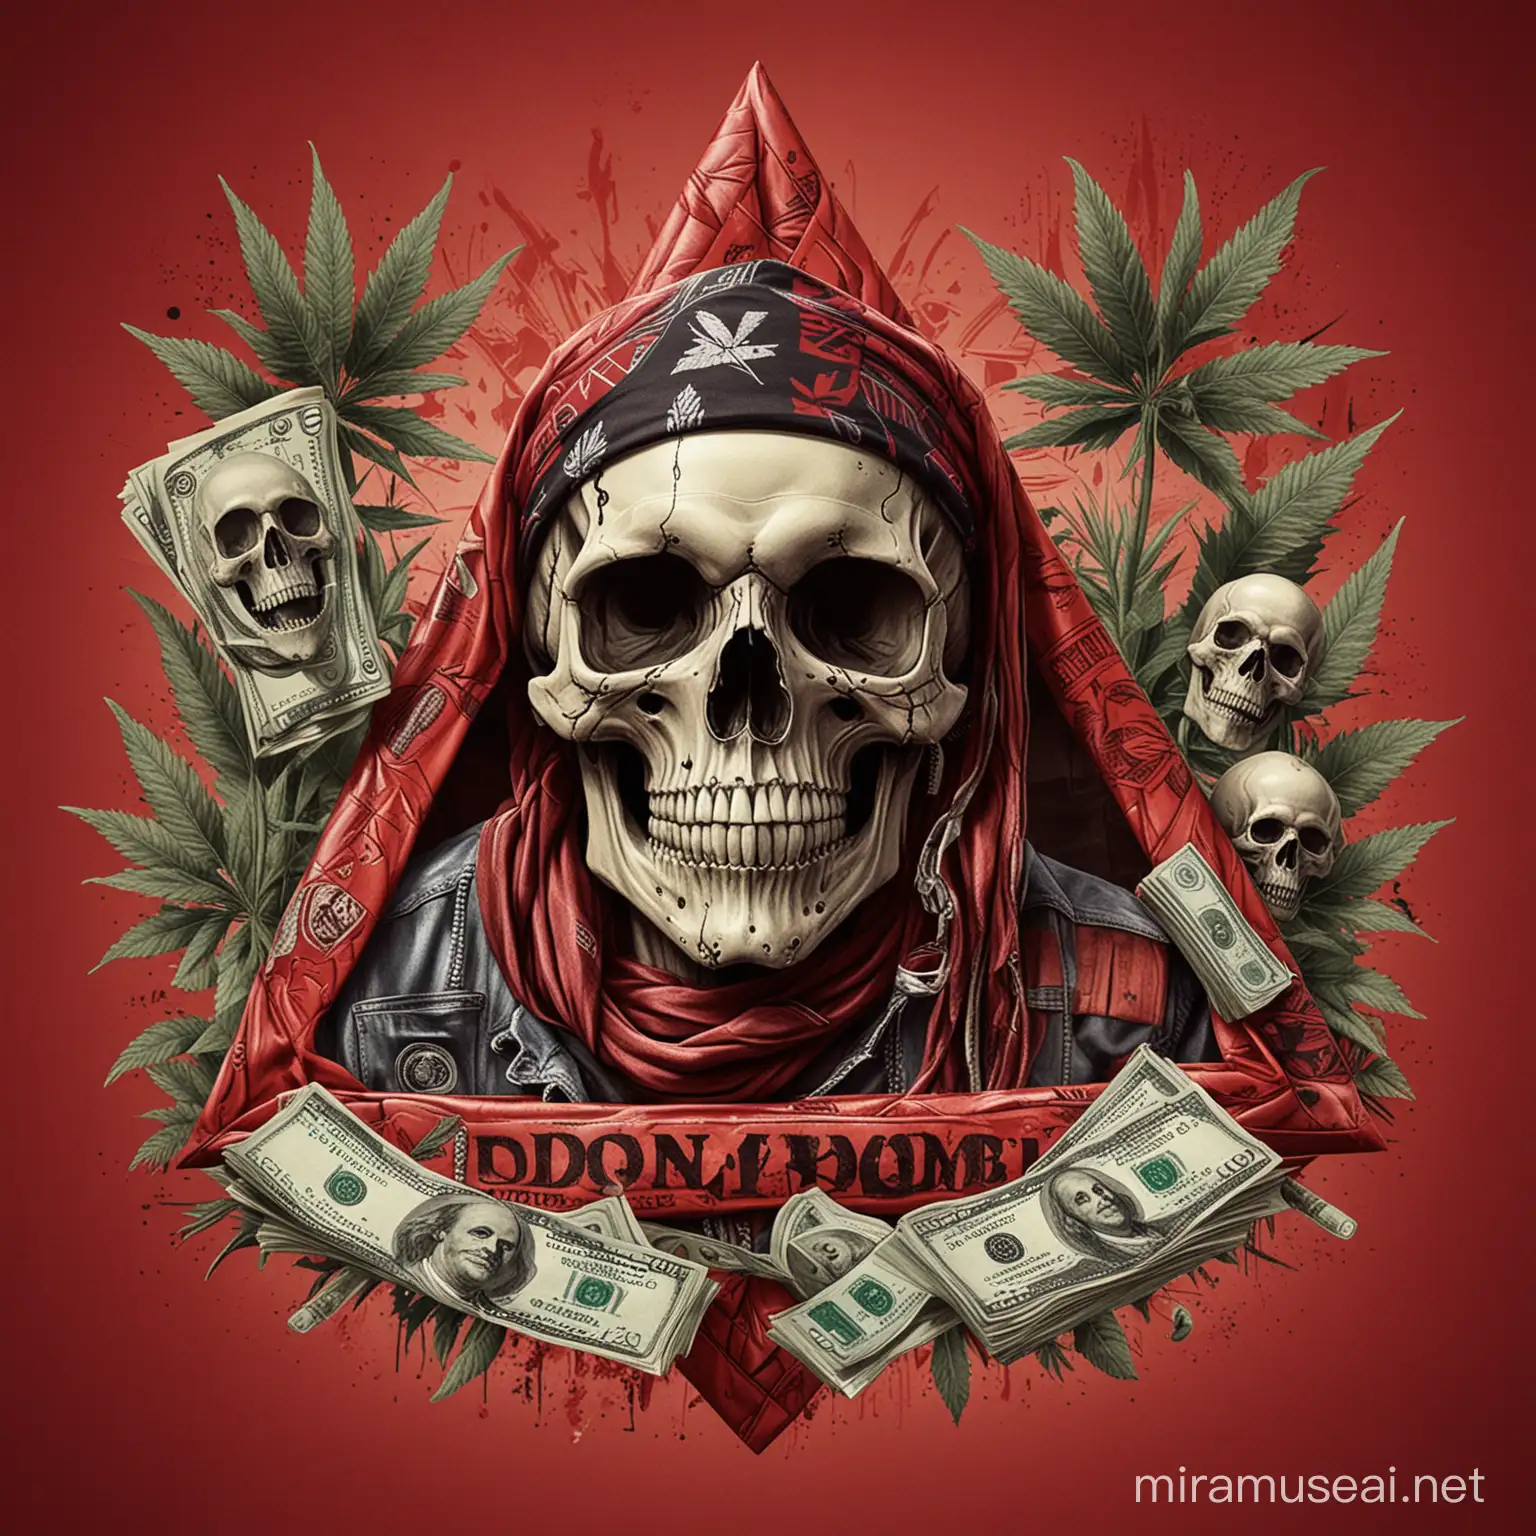 A highly professional and detailed design with the text 'dope mode' and '24', featuring a skull, money bill, bandana, skull fingers, cannabis leaf and related elements. no background , a stylish red abstract triangle created from snaked over the design